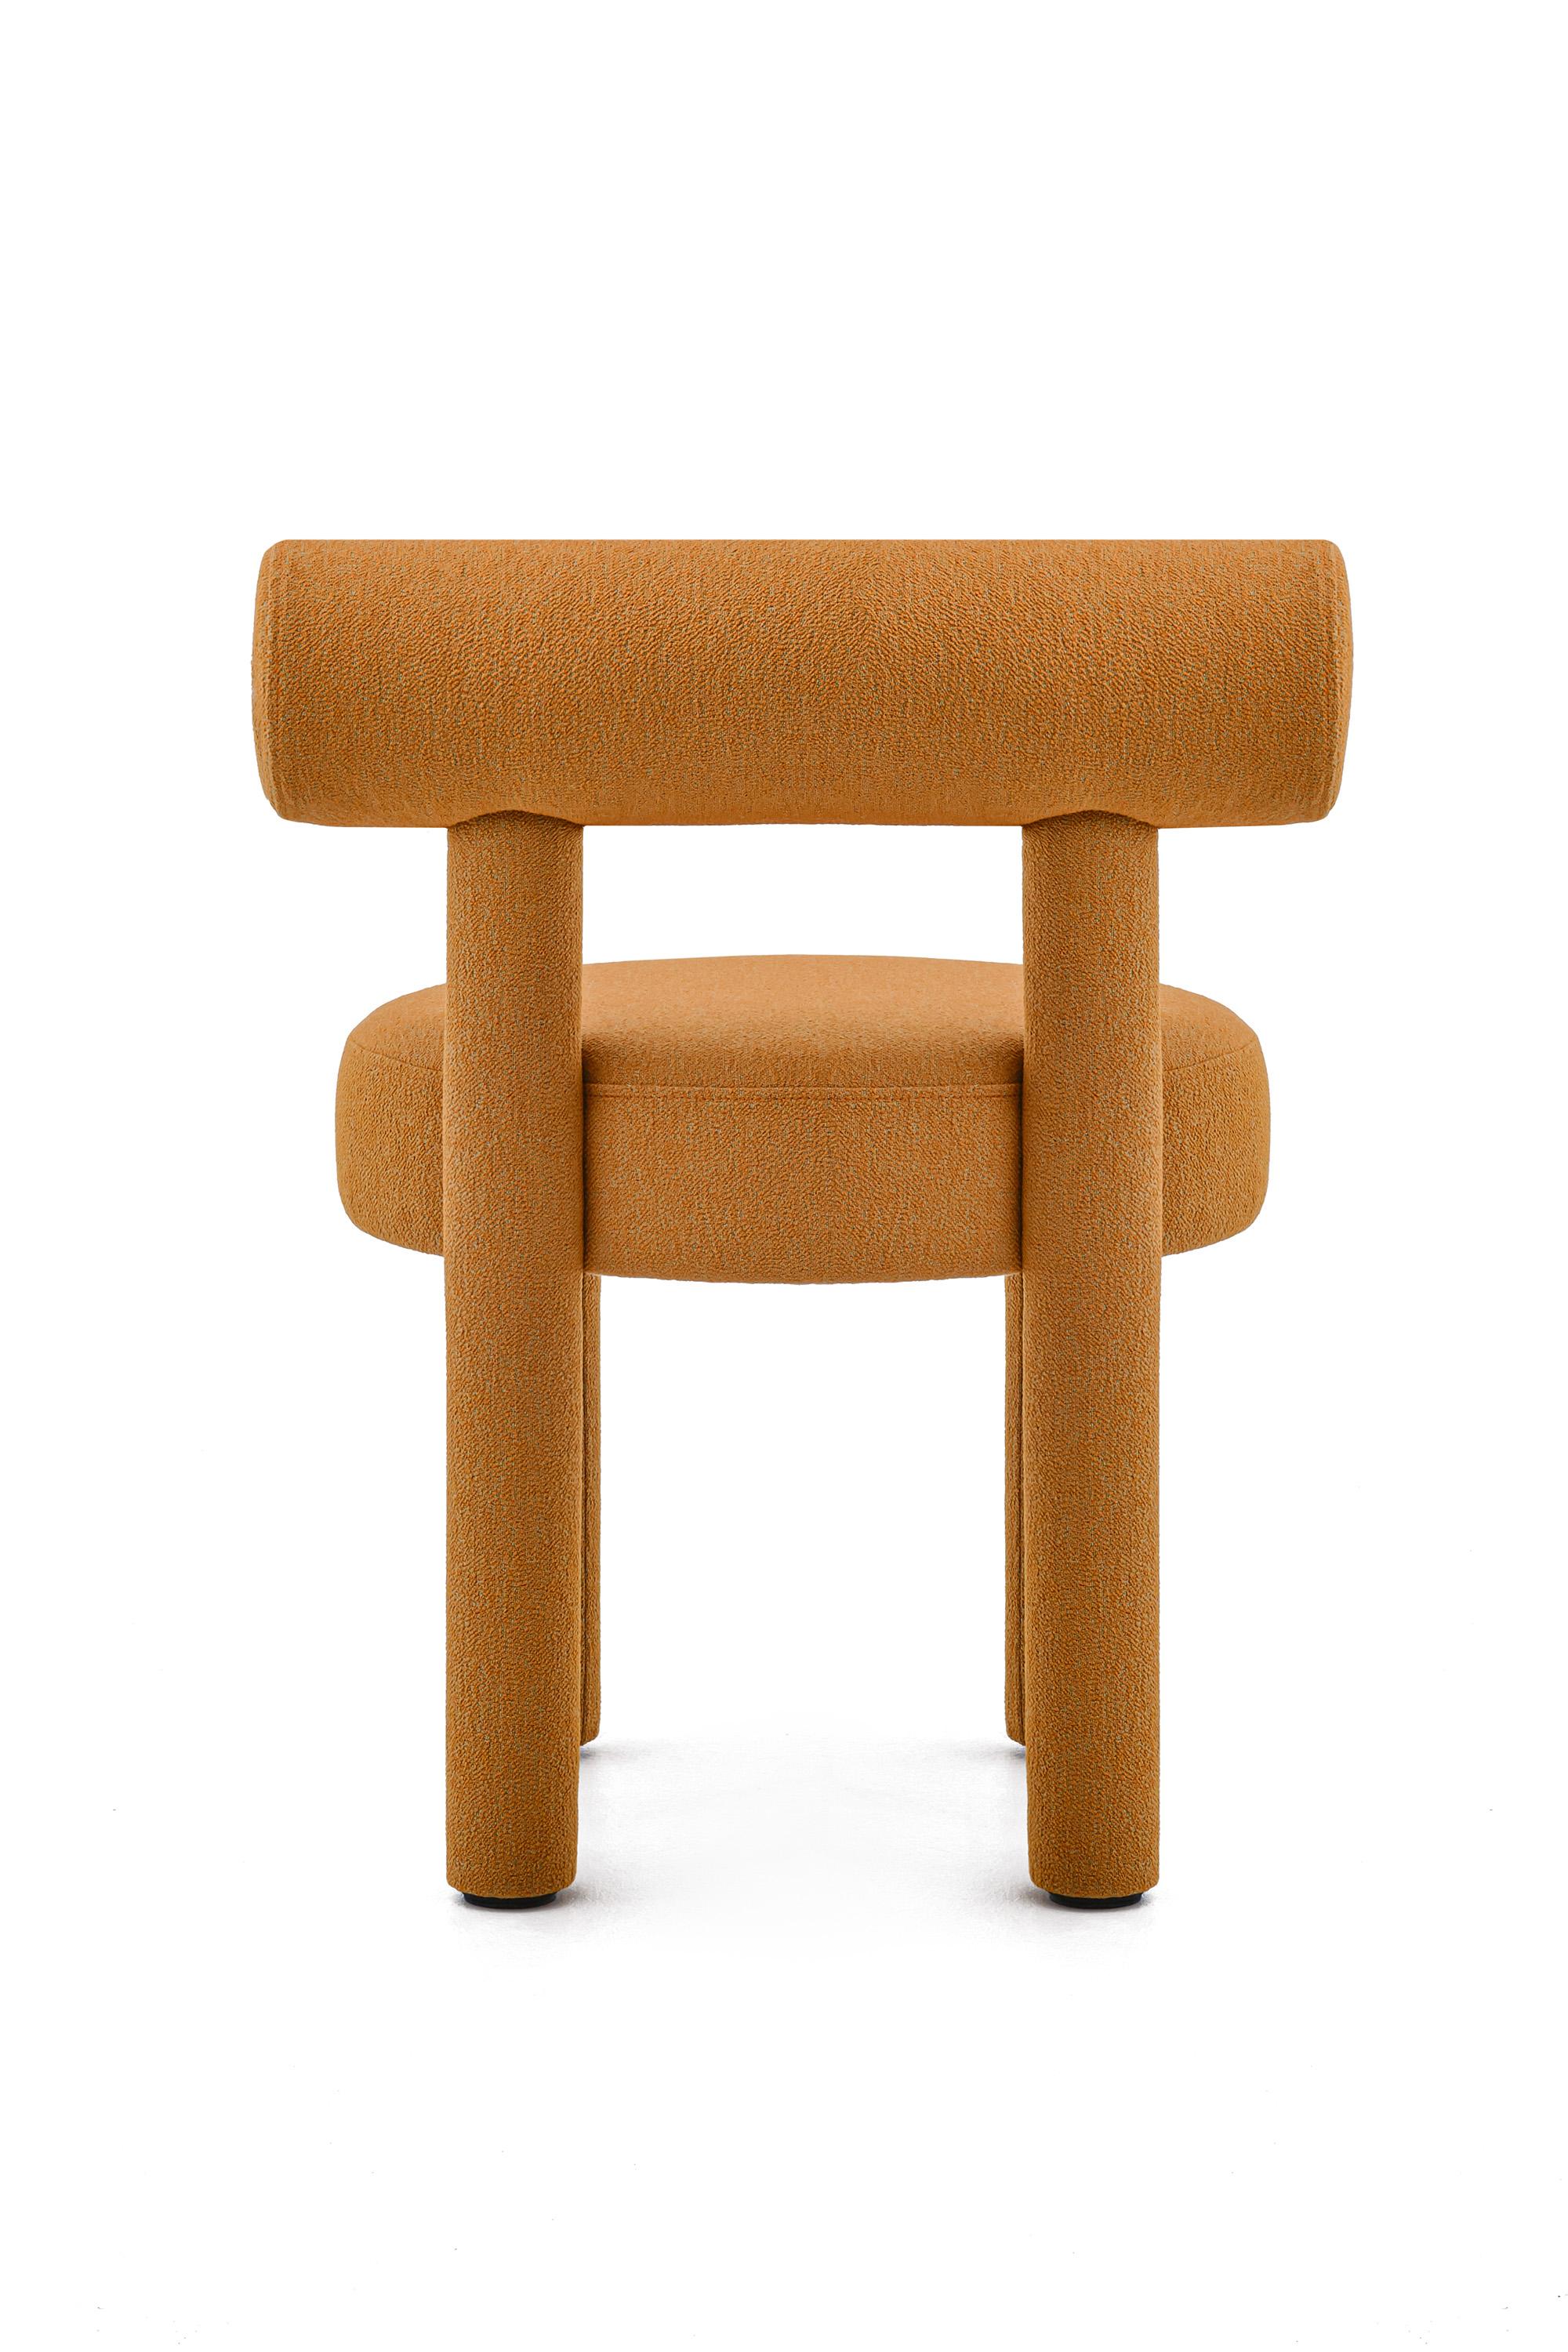 Contemporary Modern Dining Chair Gropius CS1 in Rohi Sera Contract Wool Fabric by Noom